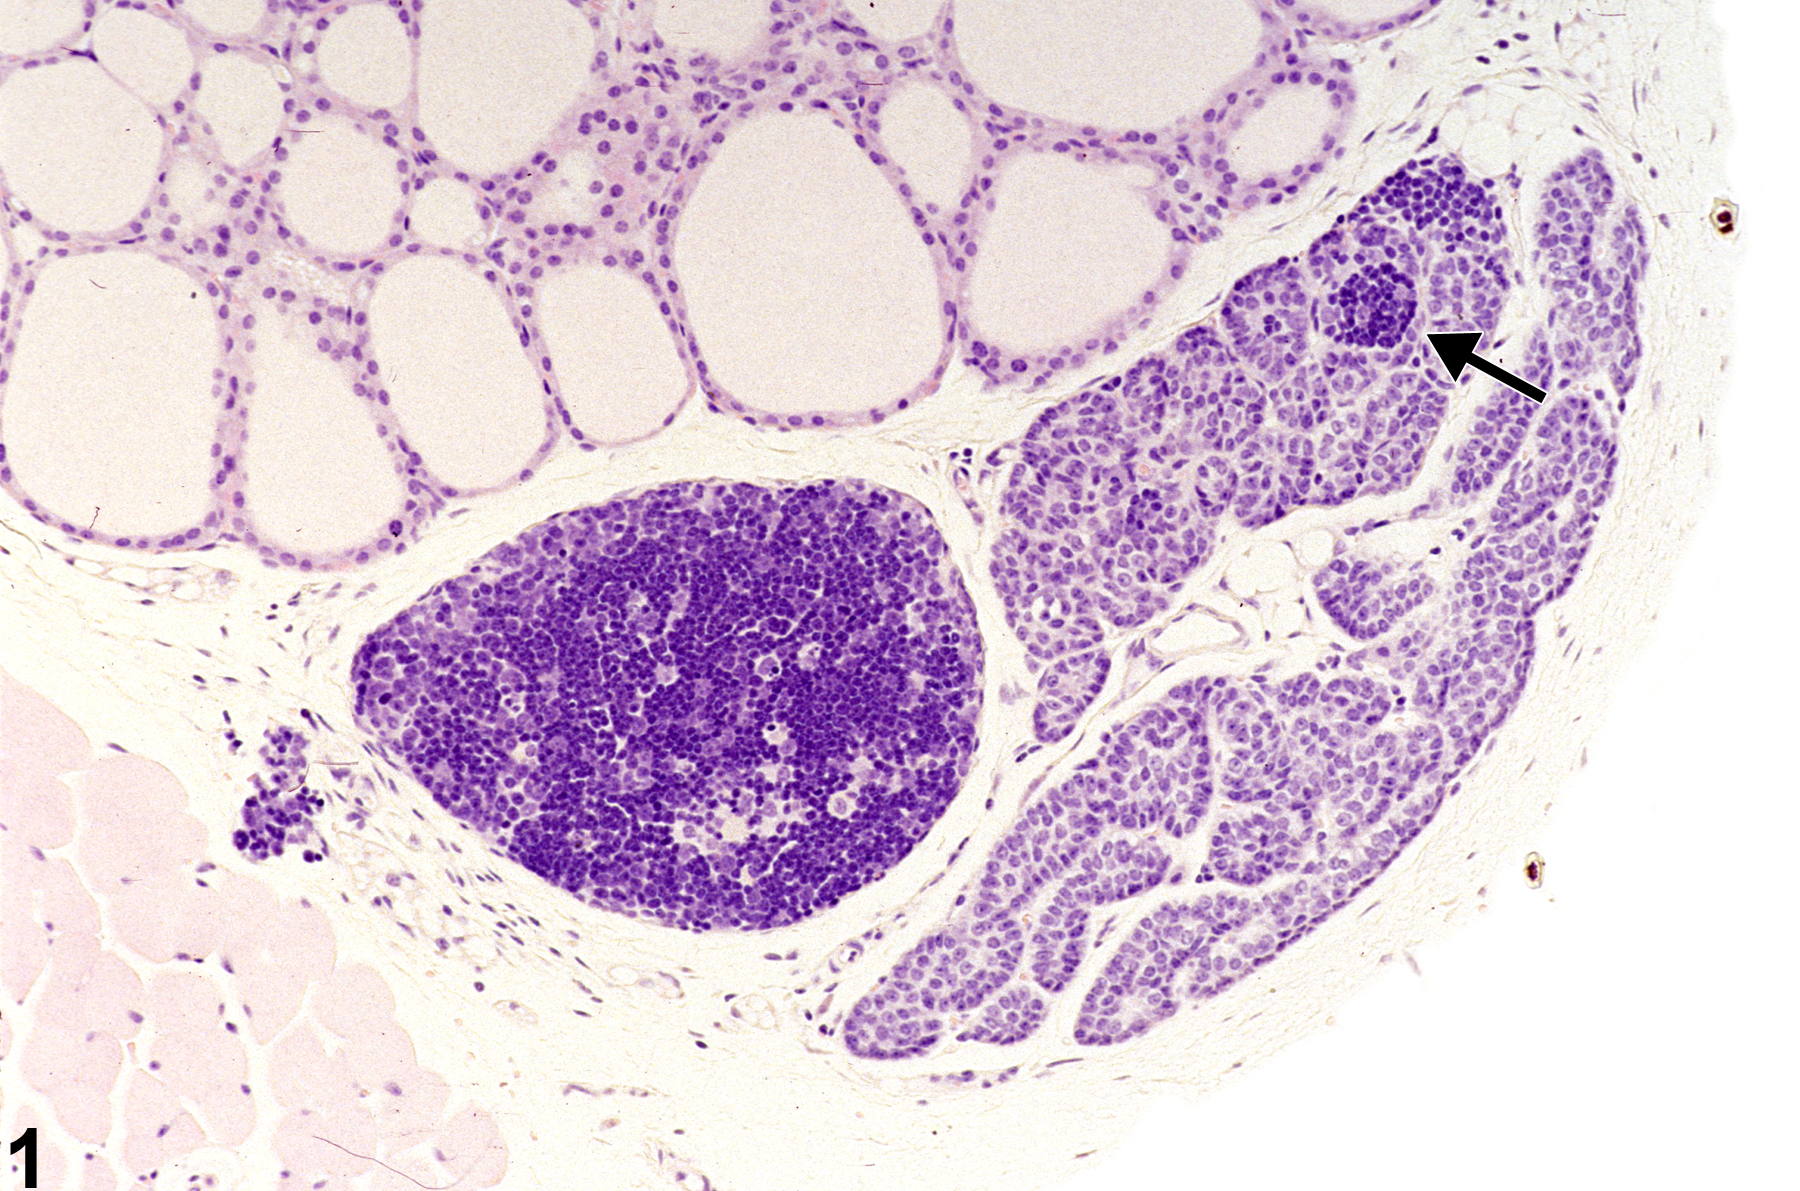 Image of ectopic tissue in the parathyroid gland from a female B6C3F1 mouse in a subchronic study